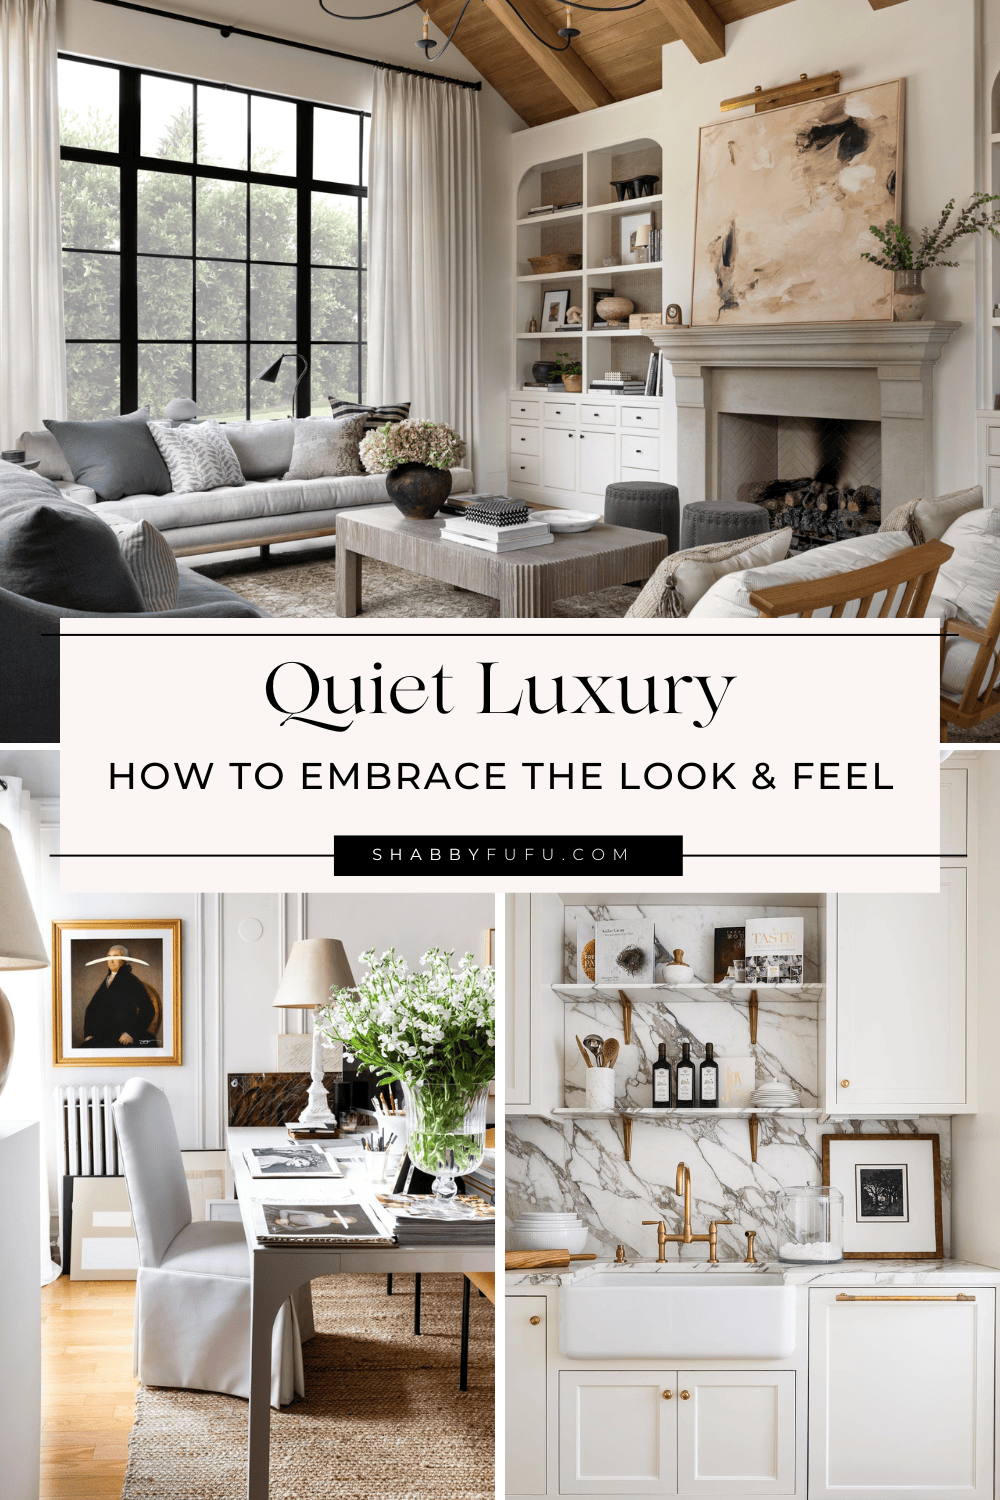 Decorative Pinterest collage featuring home decor photos titled "Quiet Luxury How to Embrace the Look and Feel"